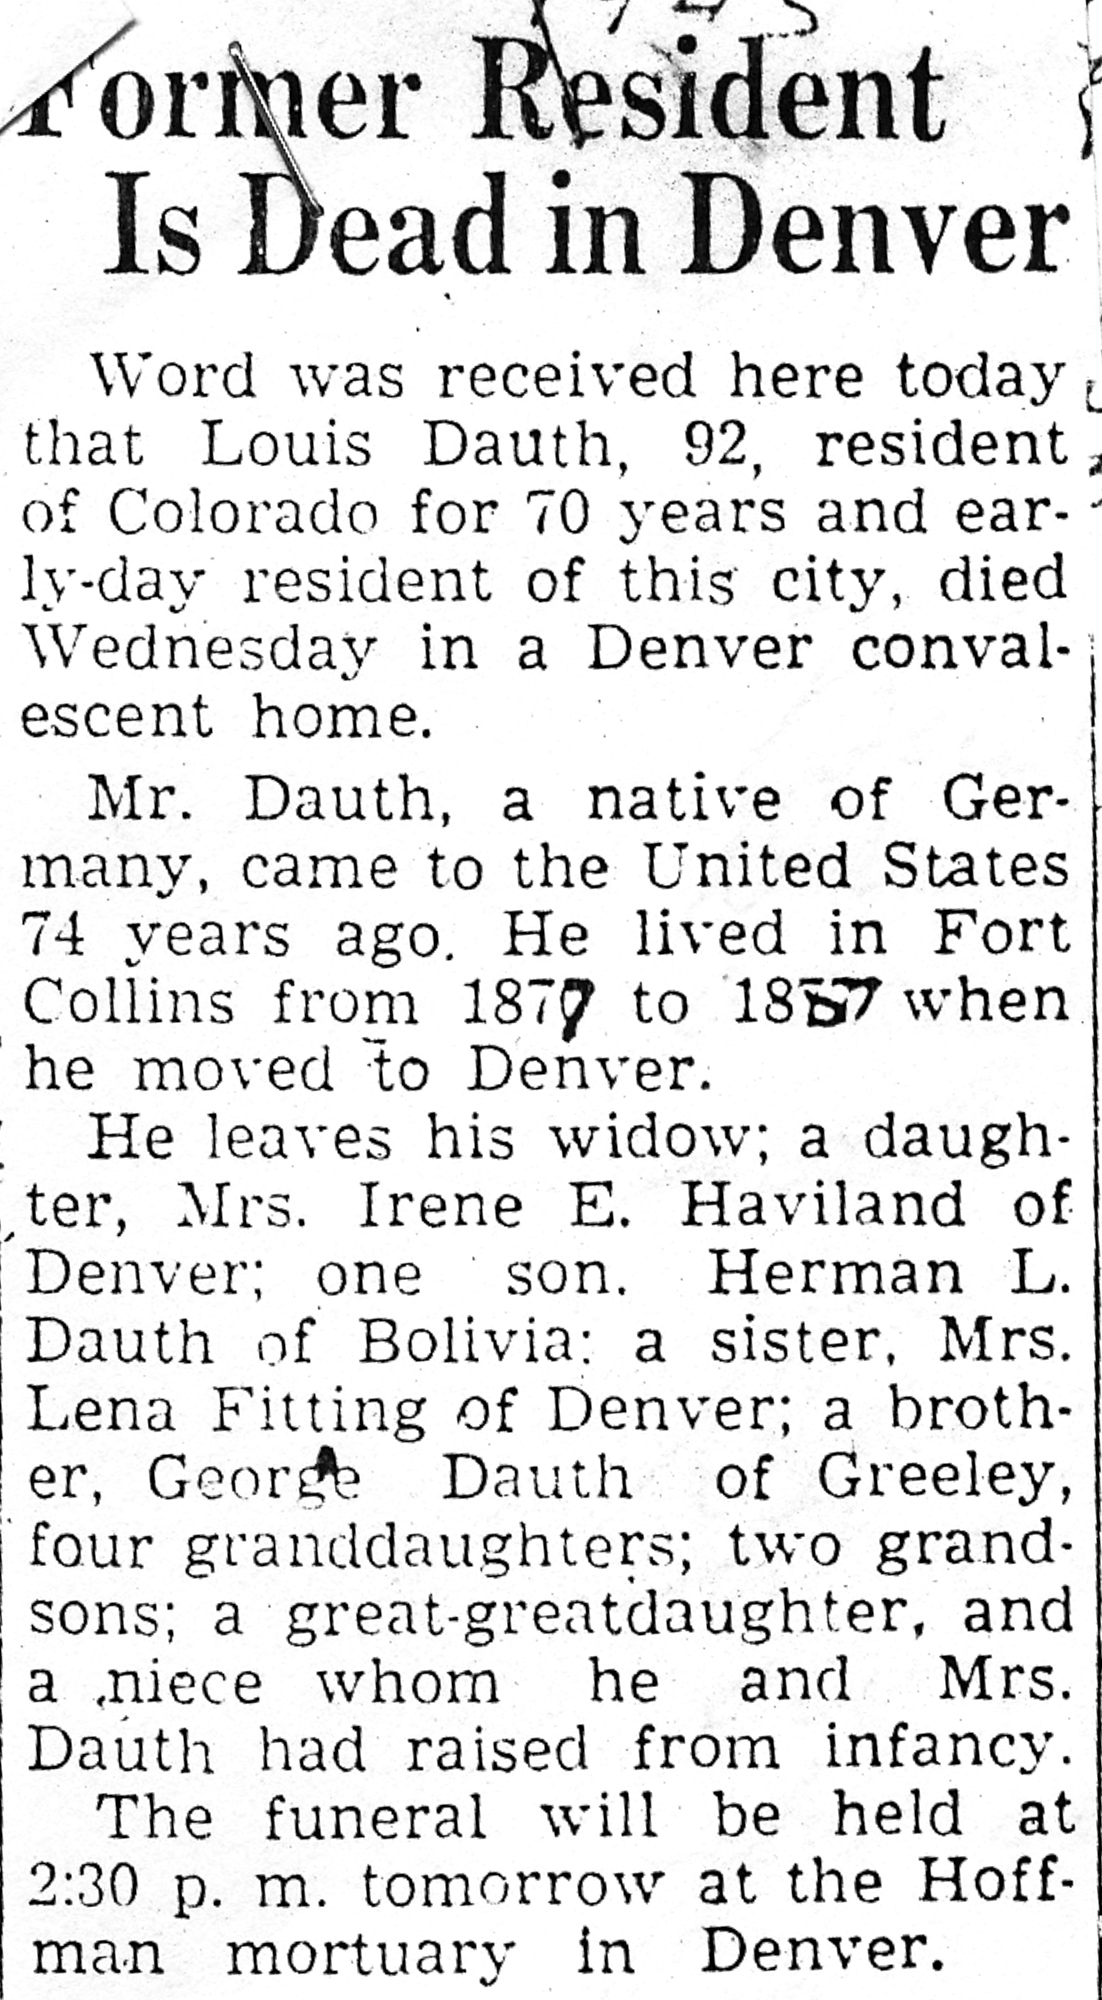 Dauth Family Archive - 1944-12-20 - Obituary Of Louis Dauth